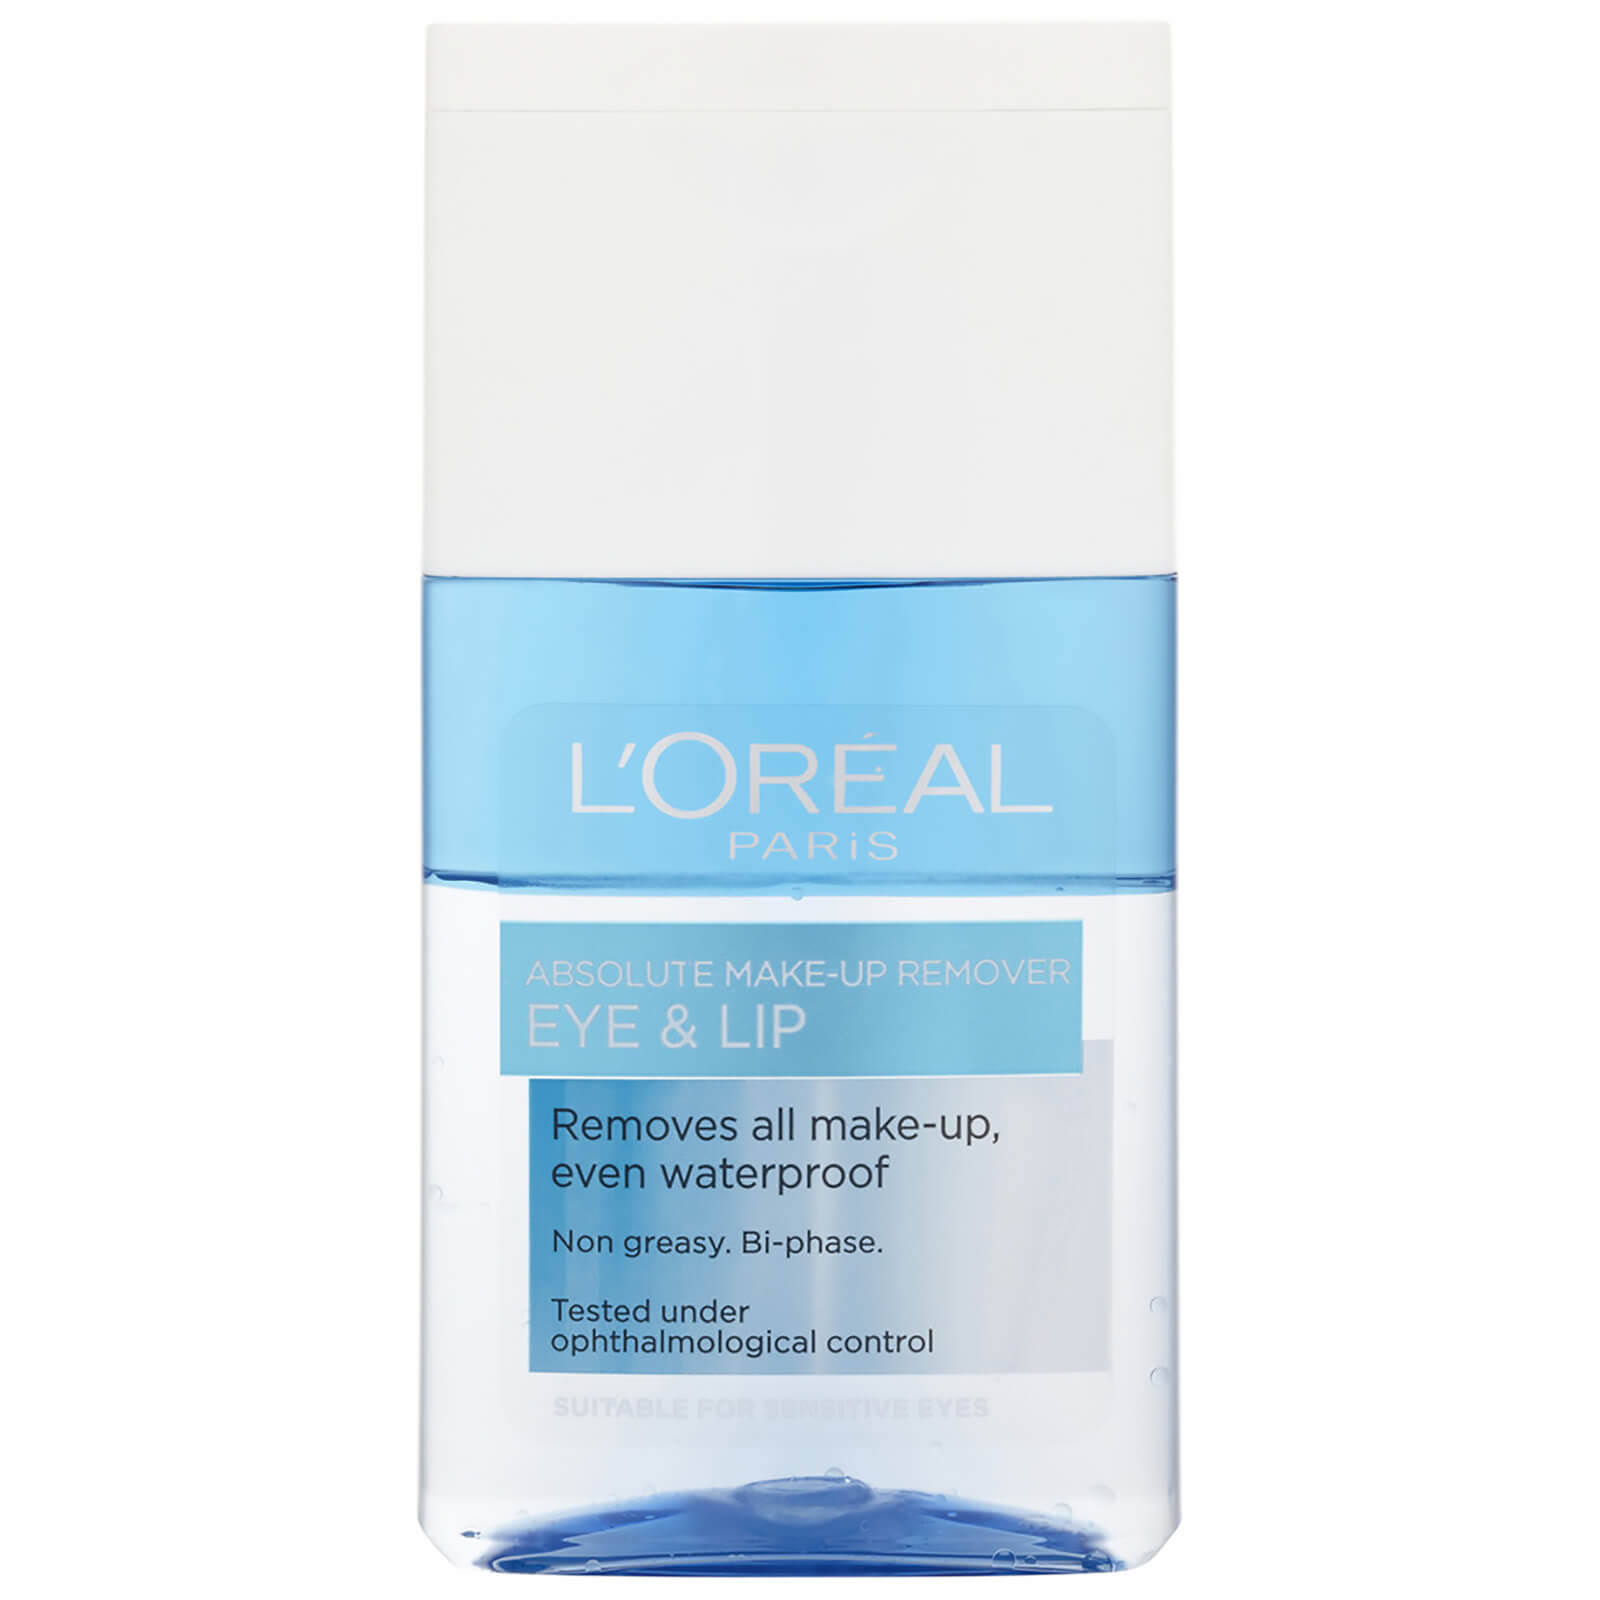 L'oreal Paris Absolute Make Up Remover - Eye and Lip, 125ml